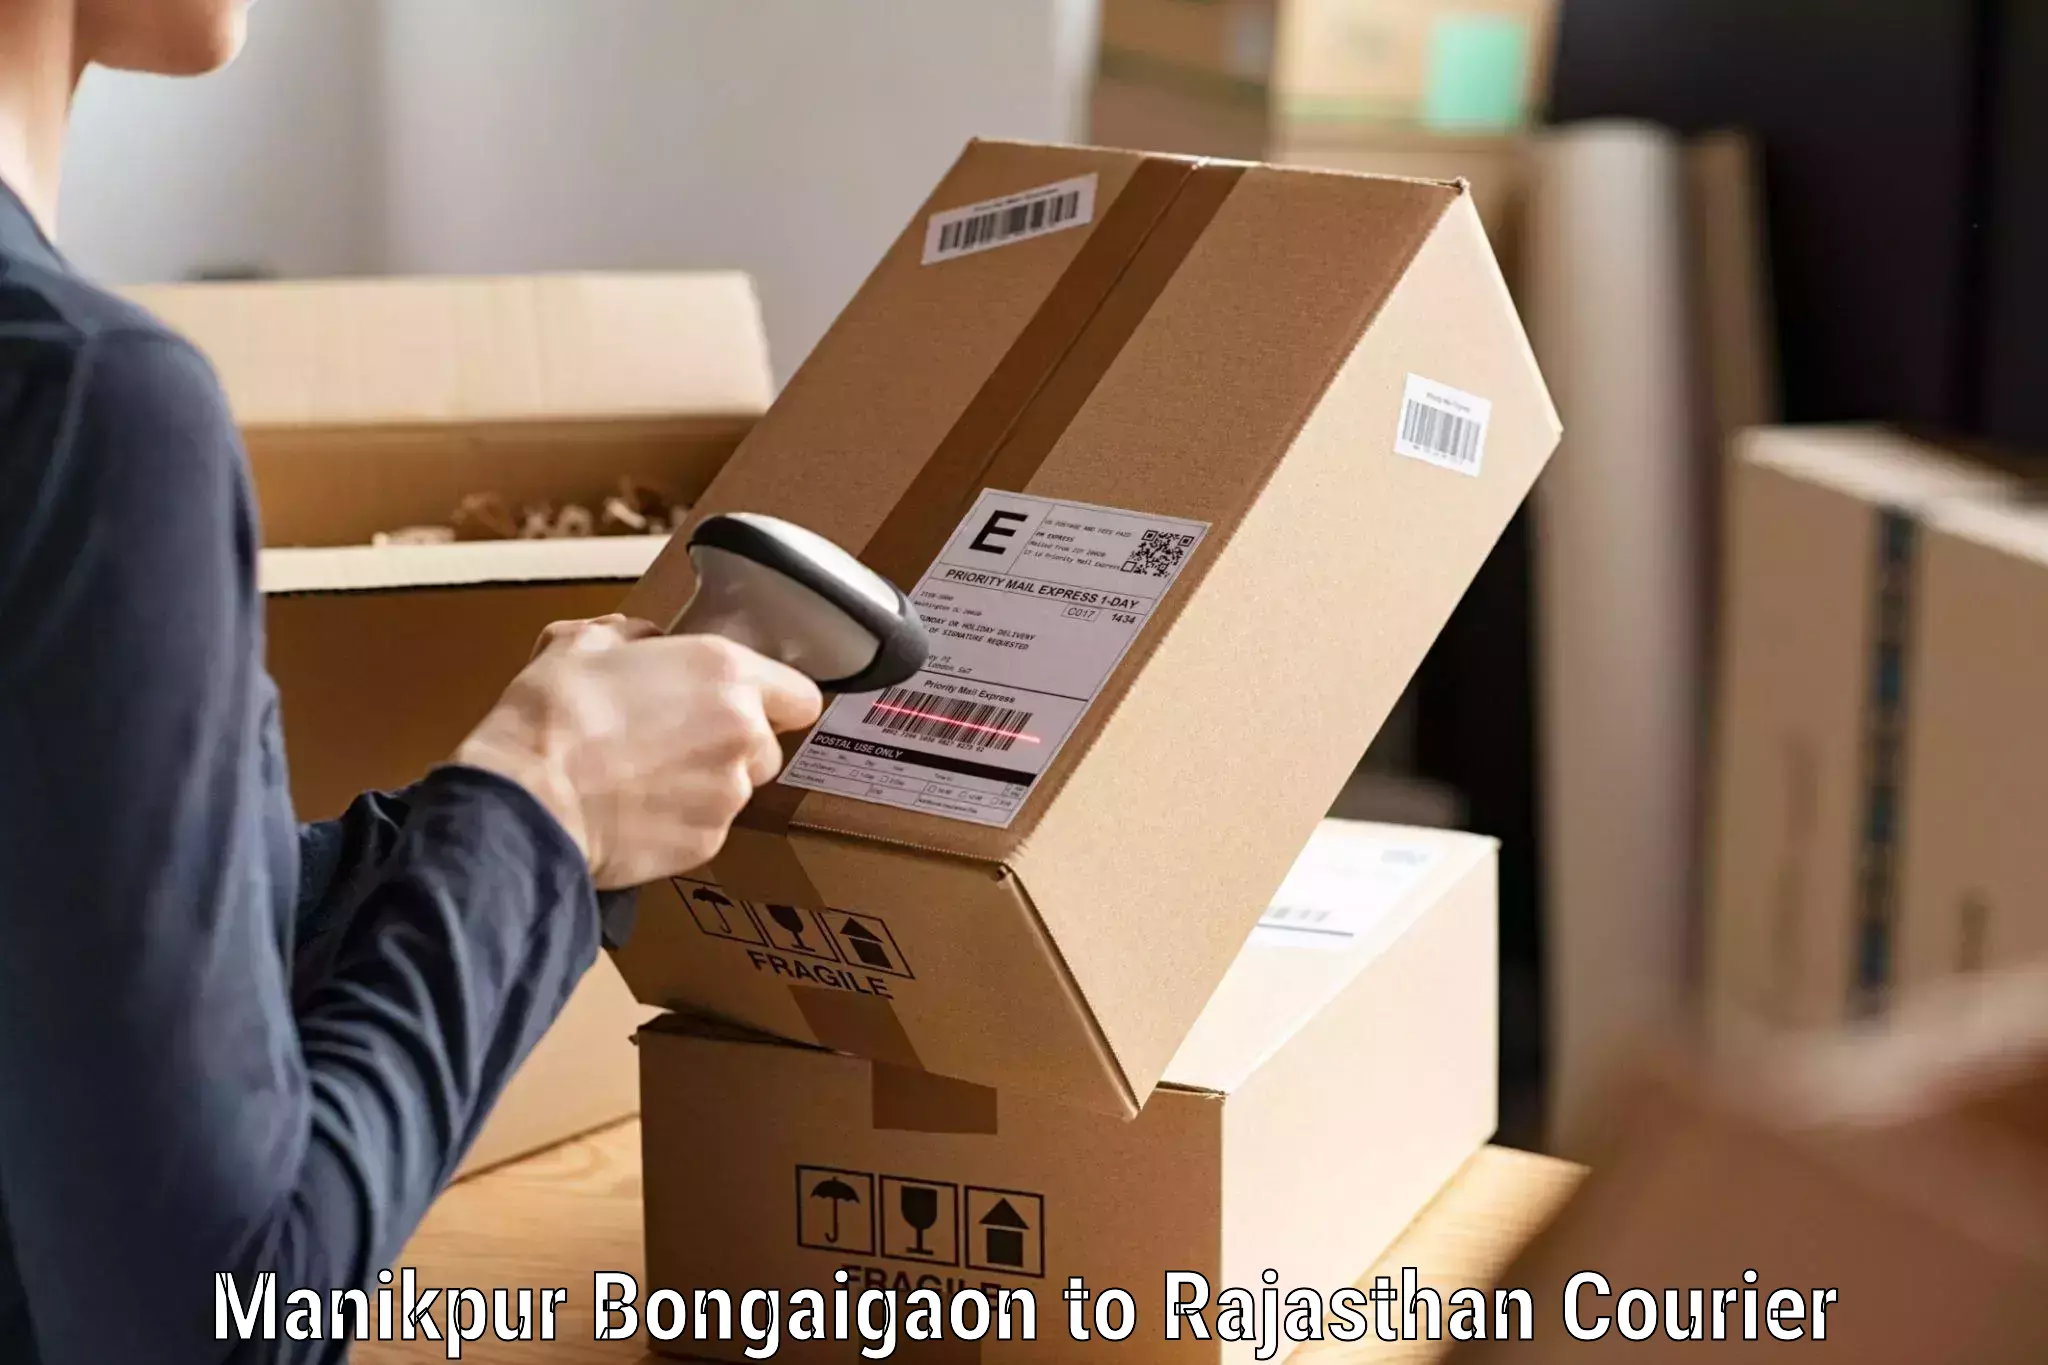 Courier services in Manikpur Bongaigaon to Rajasthan